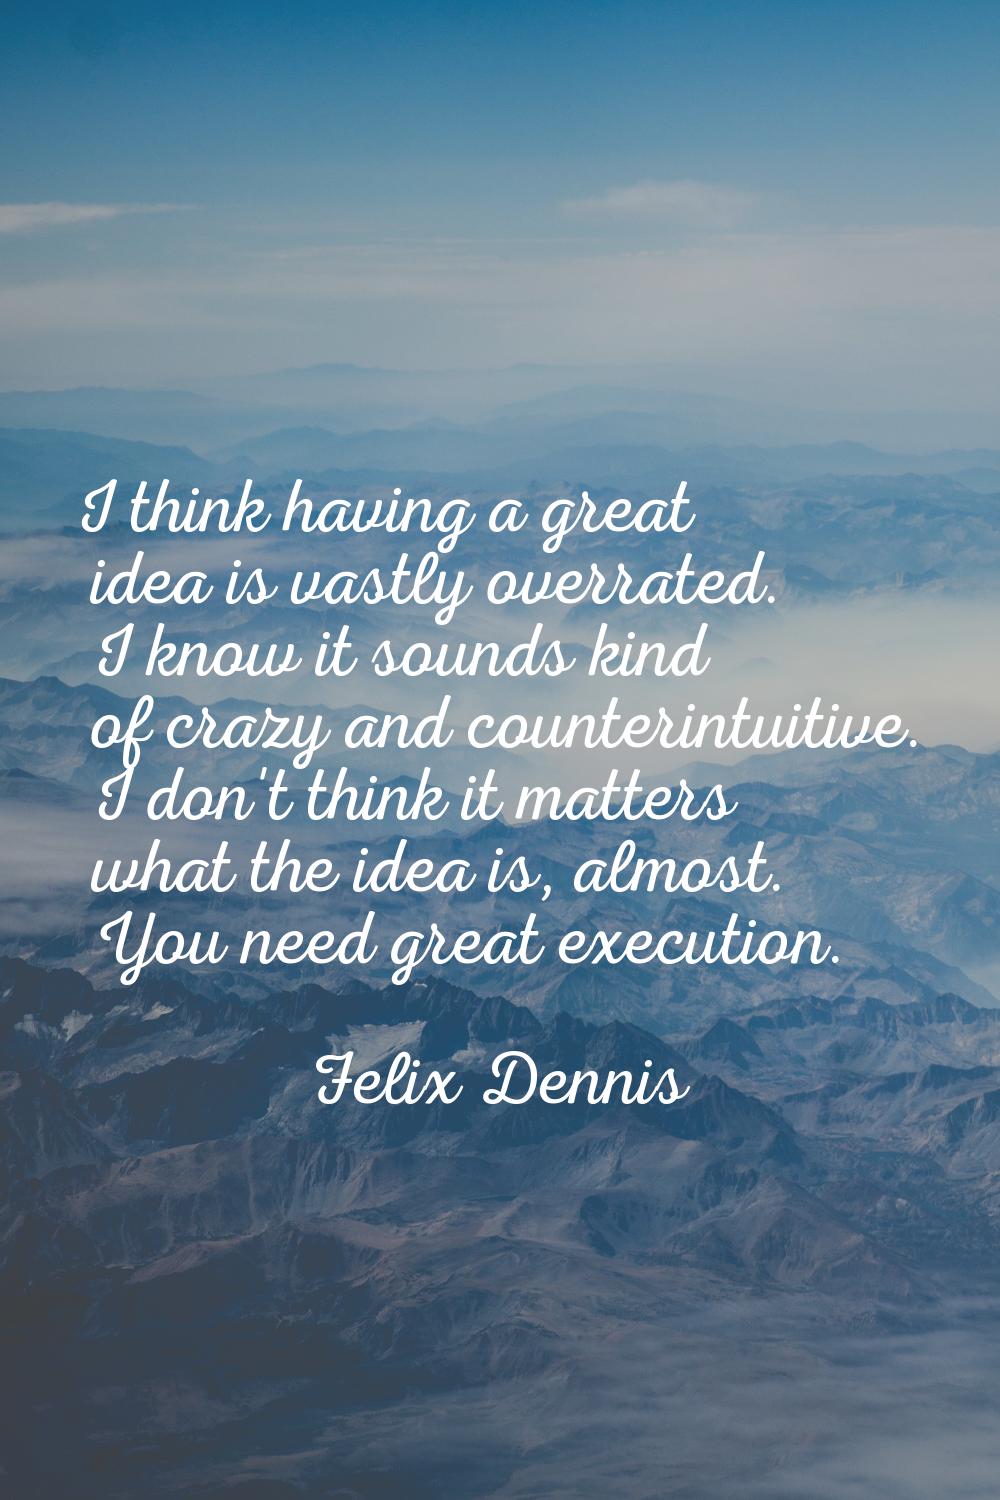 I think having a great idea is vastly overrated. I know it sounds kind of crazy and counterintuitiv